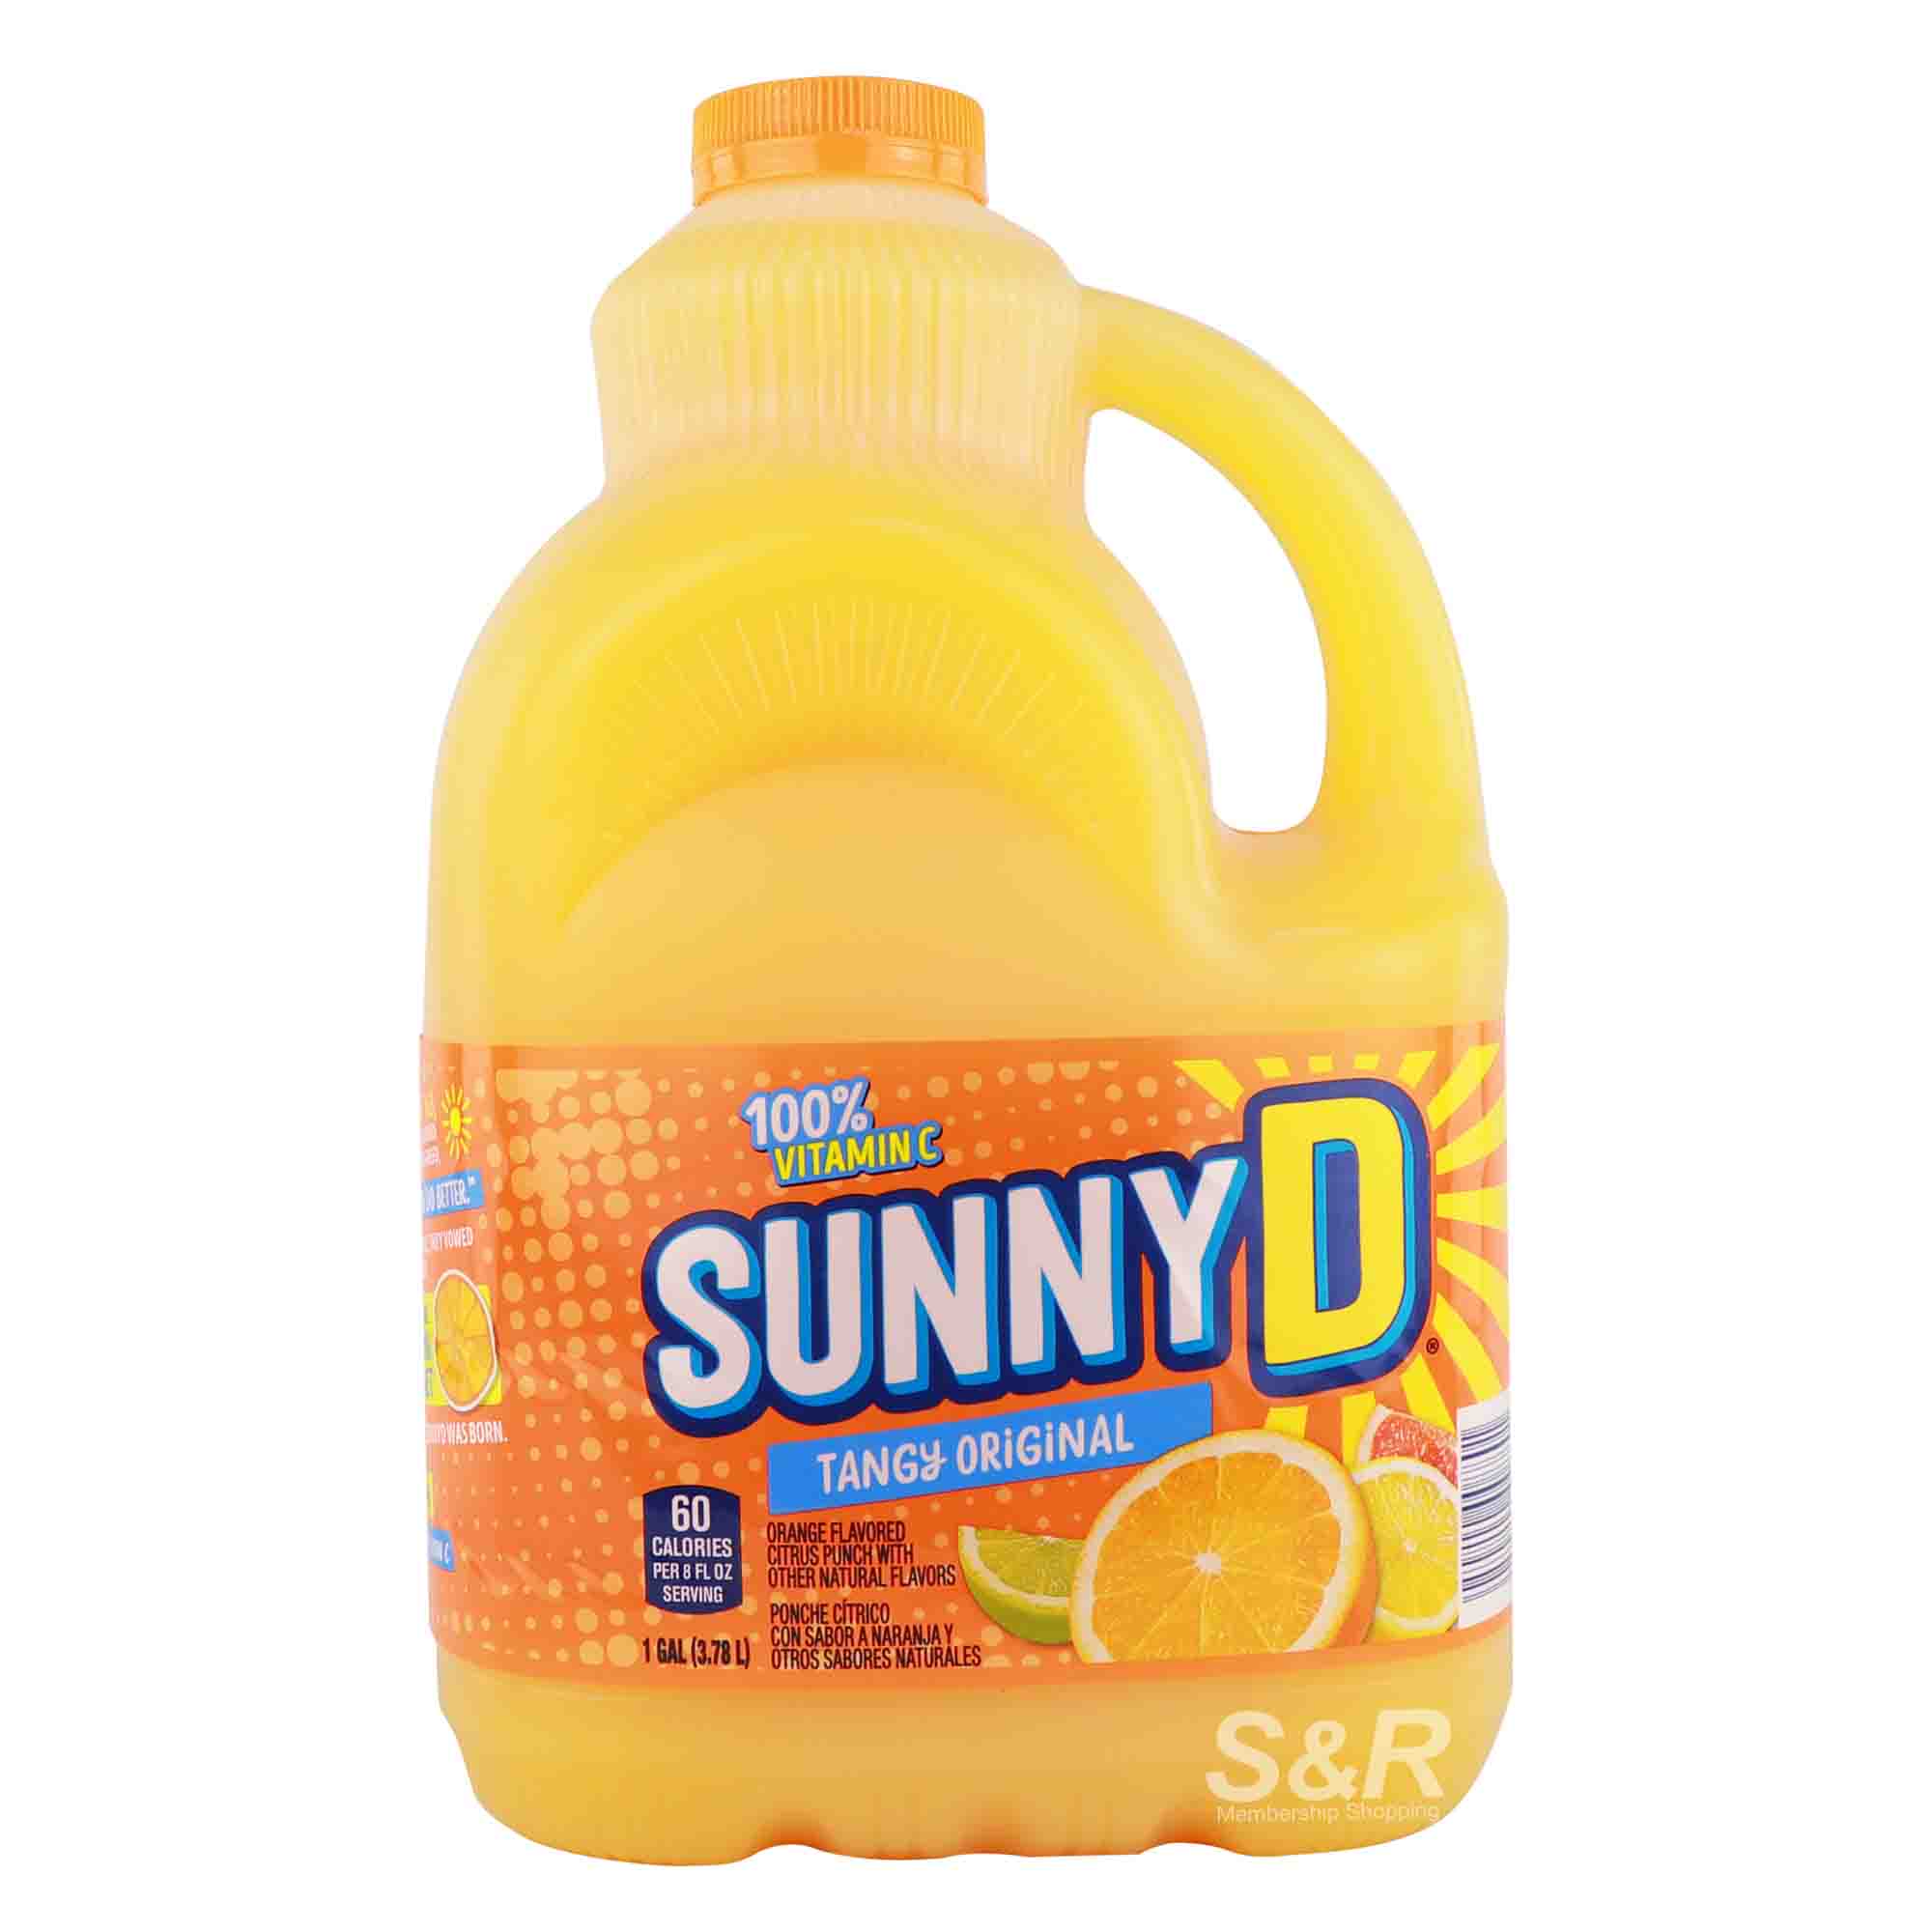 Sunny D Tangy Original Orange Flavored Citrus Punch with Other Natural Flavors 3.78L